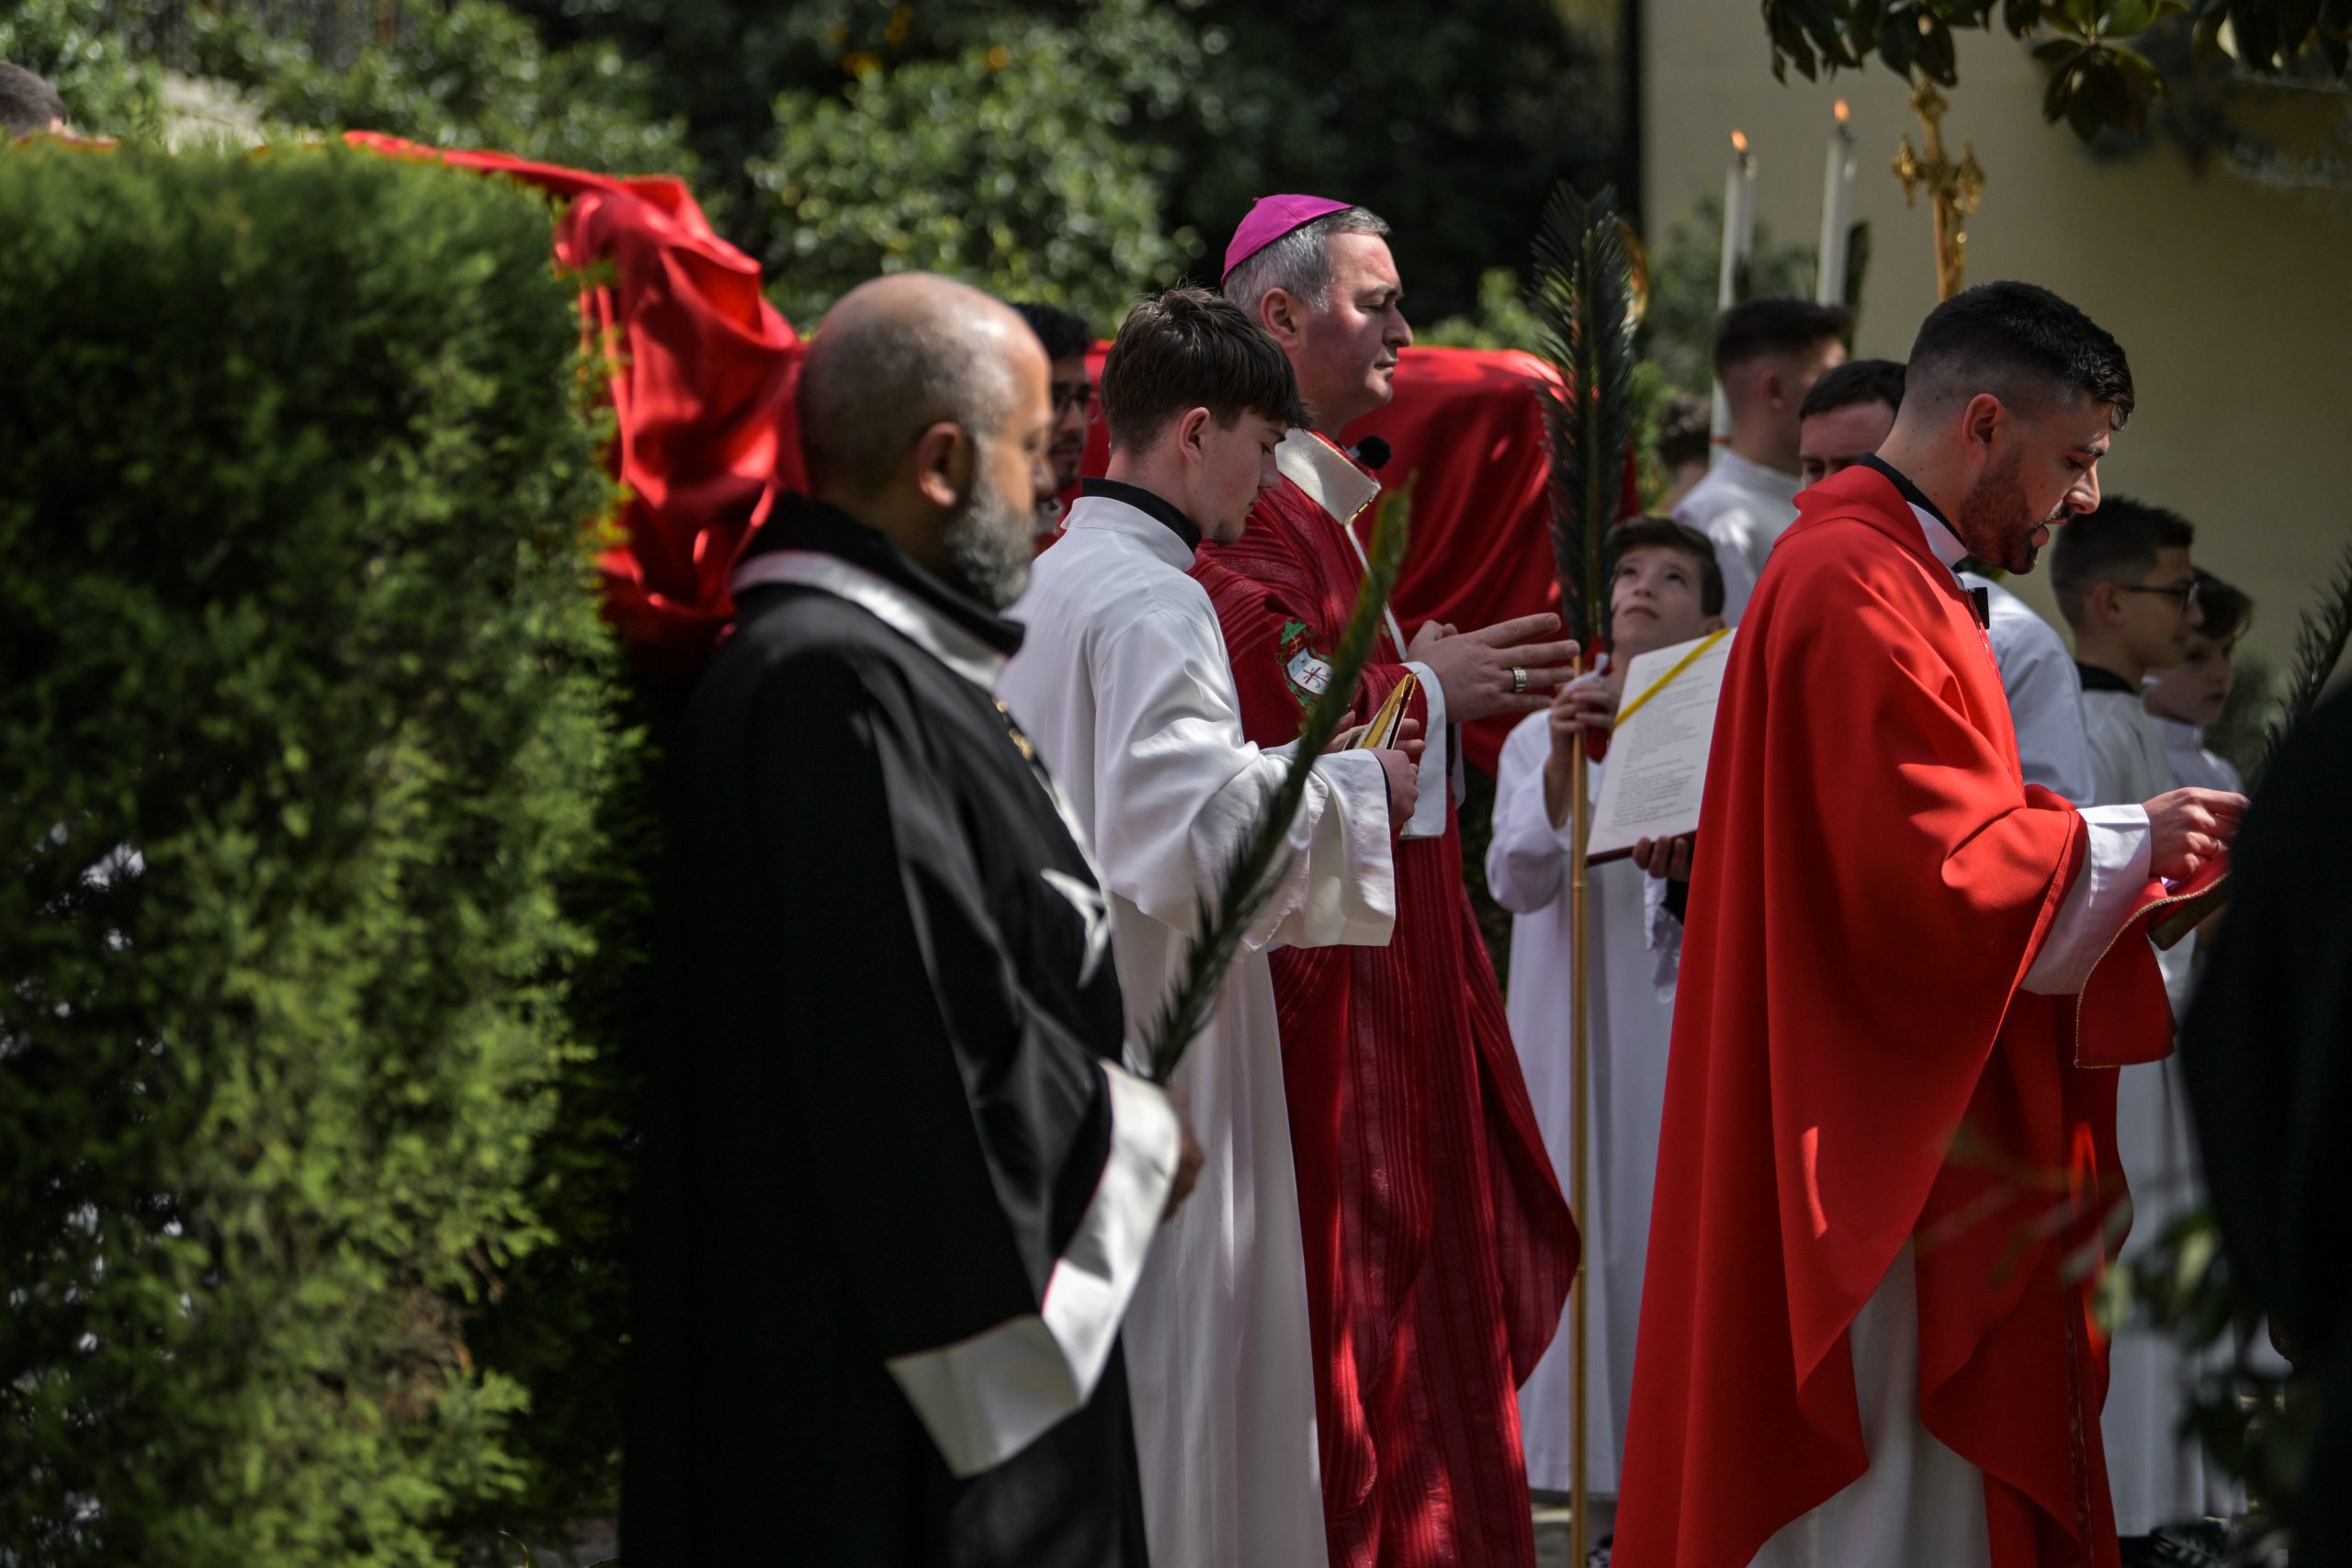 Palm Sunday Solemnity in Tirana Cathedral celebrated by Archbishop Arjan Dodaj, Archbishop of Tirana-Durrës and Honorary Conventual Chaplain of the Sovereign Military Order of Malta